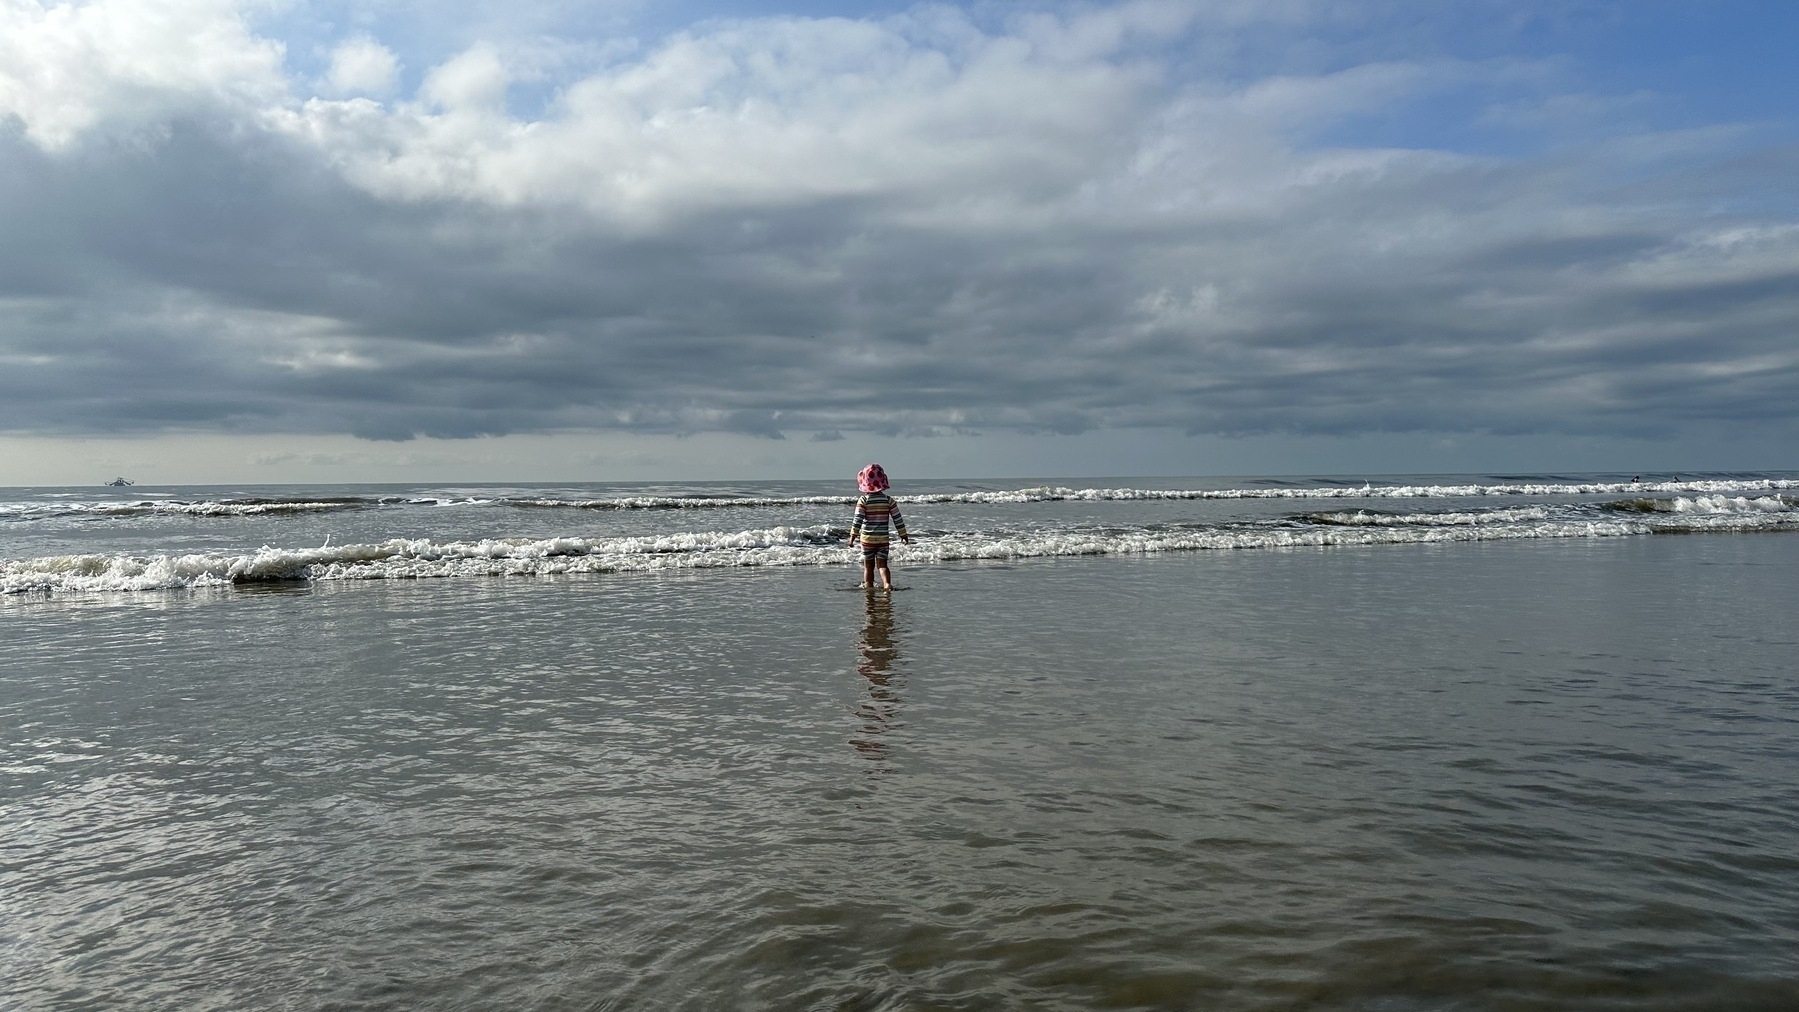 My daughter standing in the waves on the beach